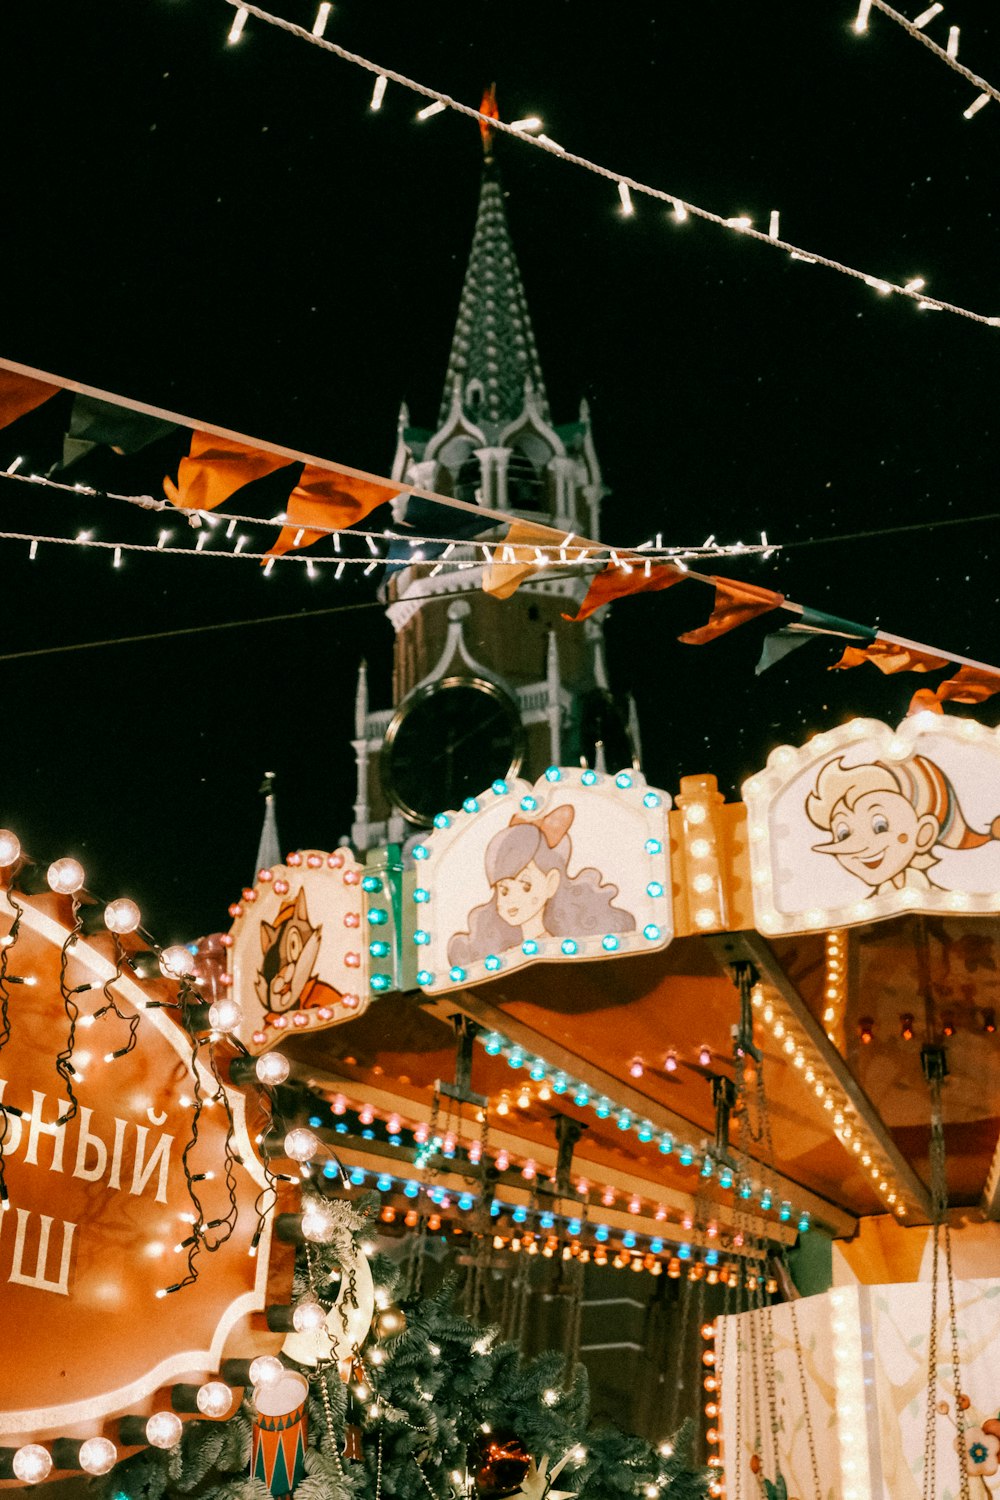 a carousel at night with lights and decorations